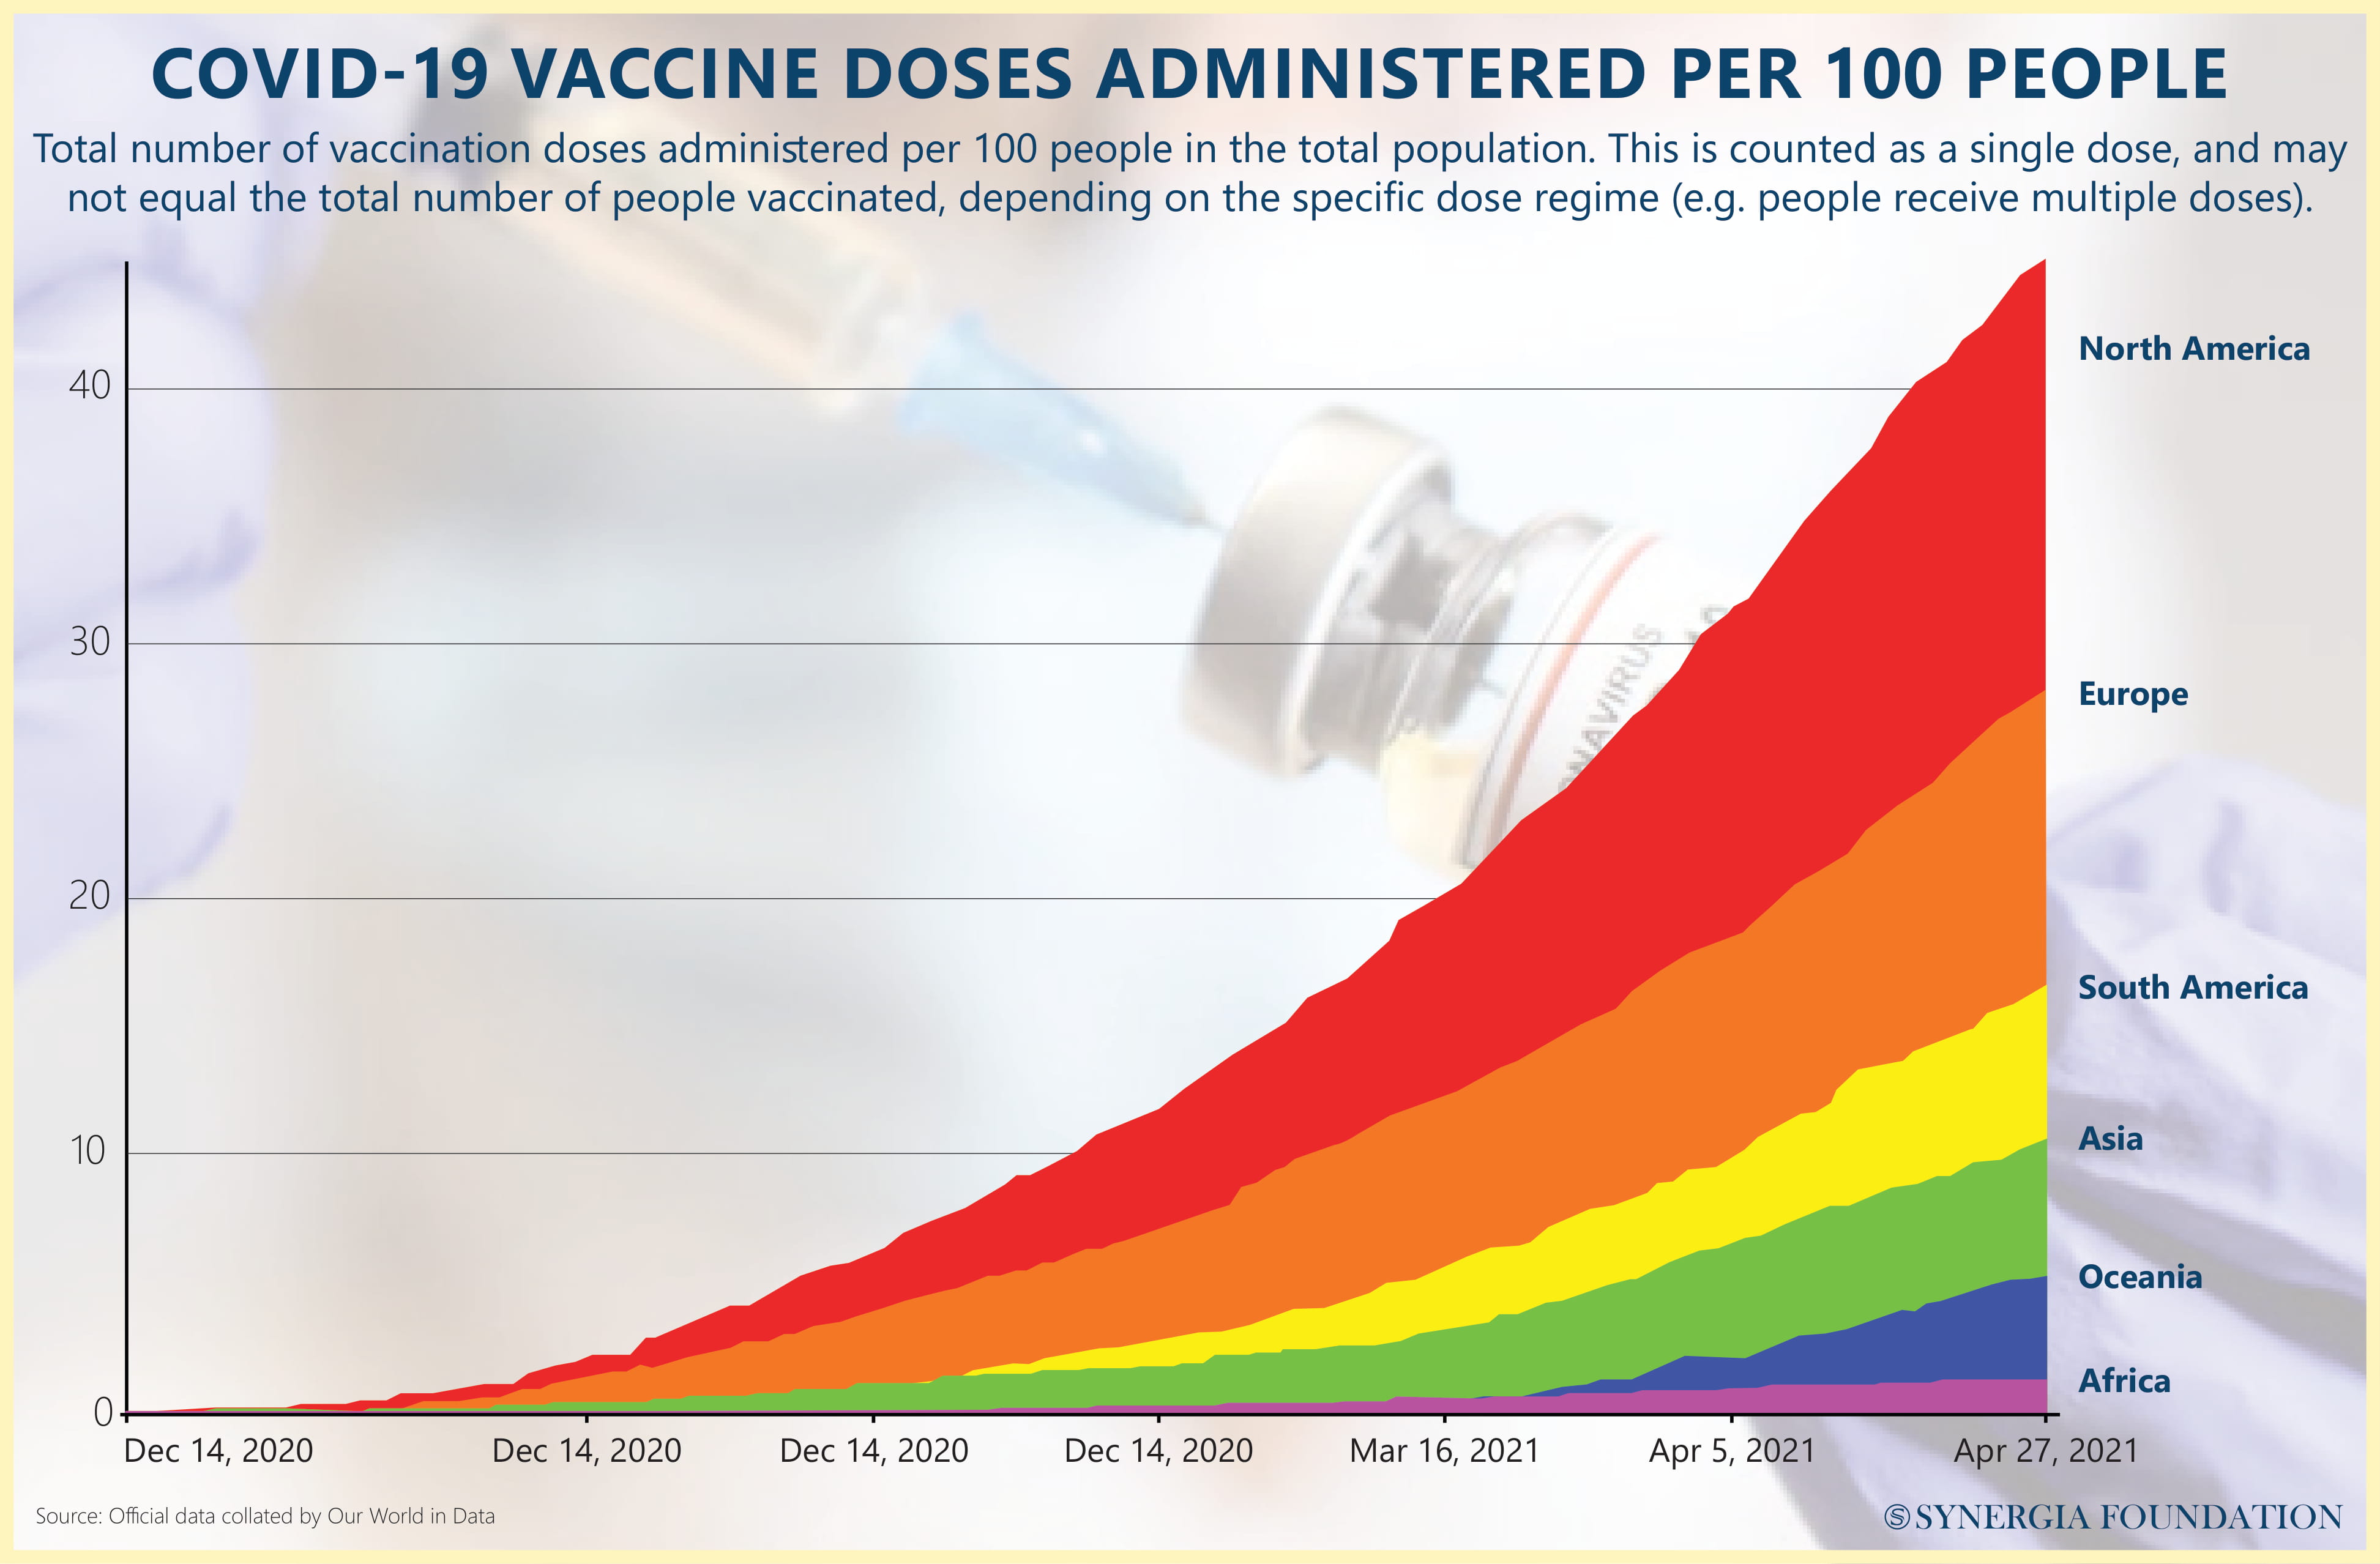 COVID vaccines administered per 100 people 